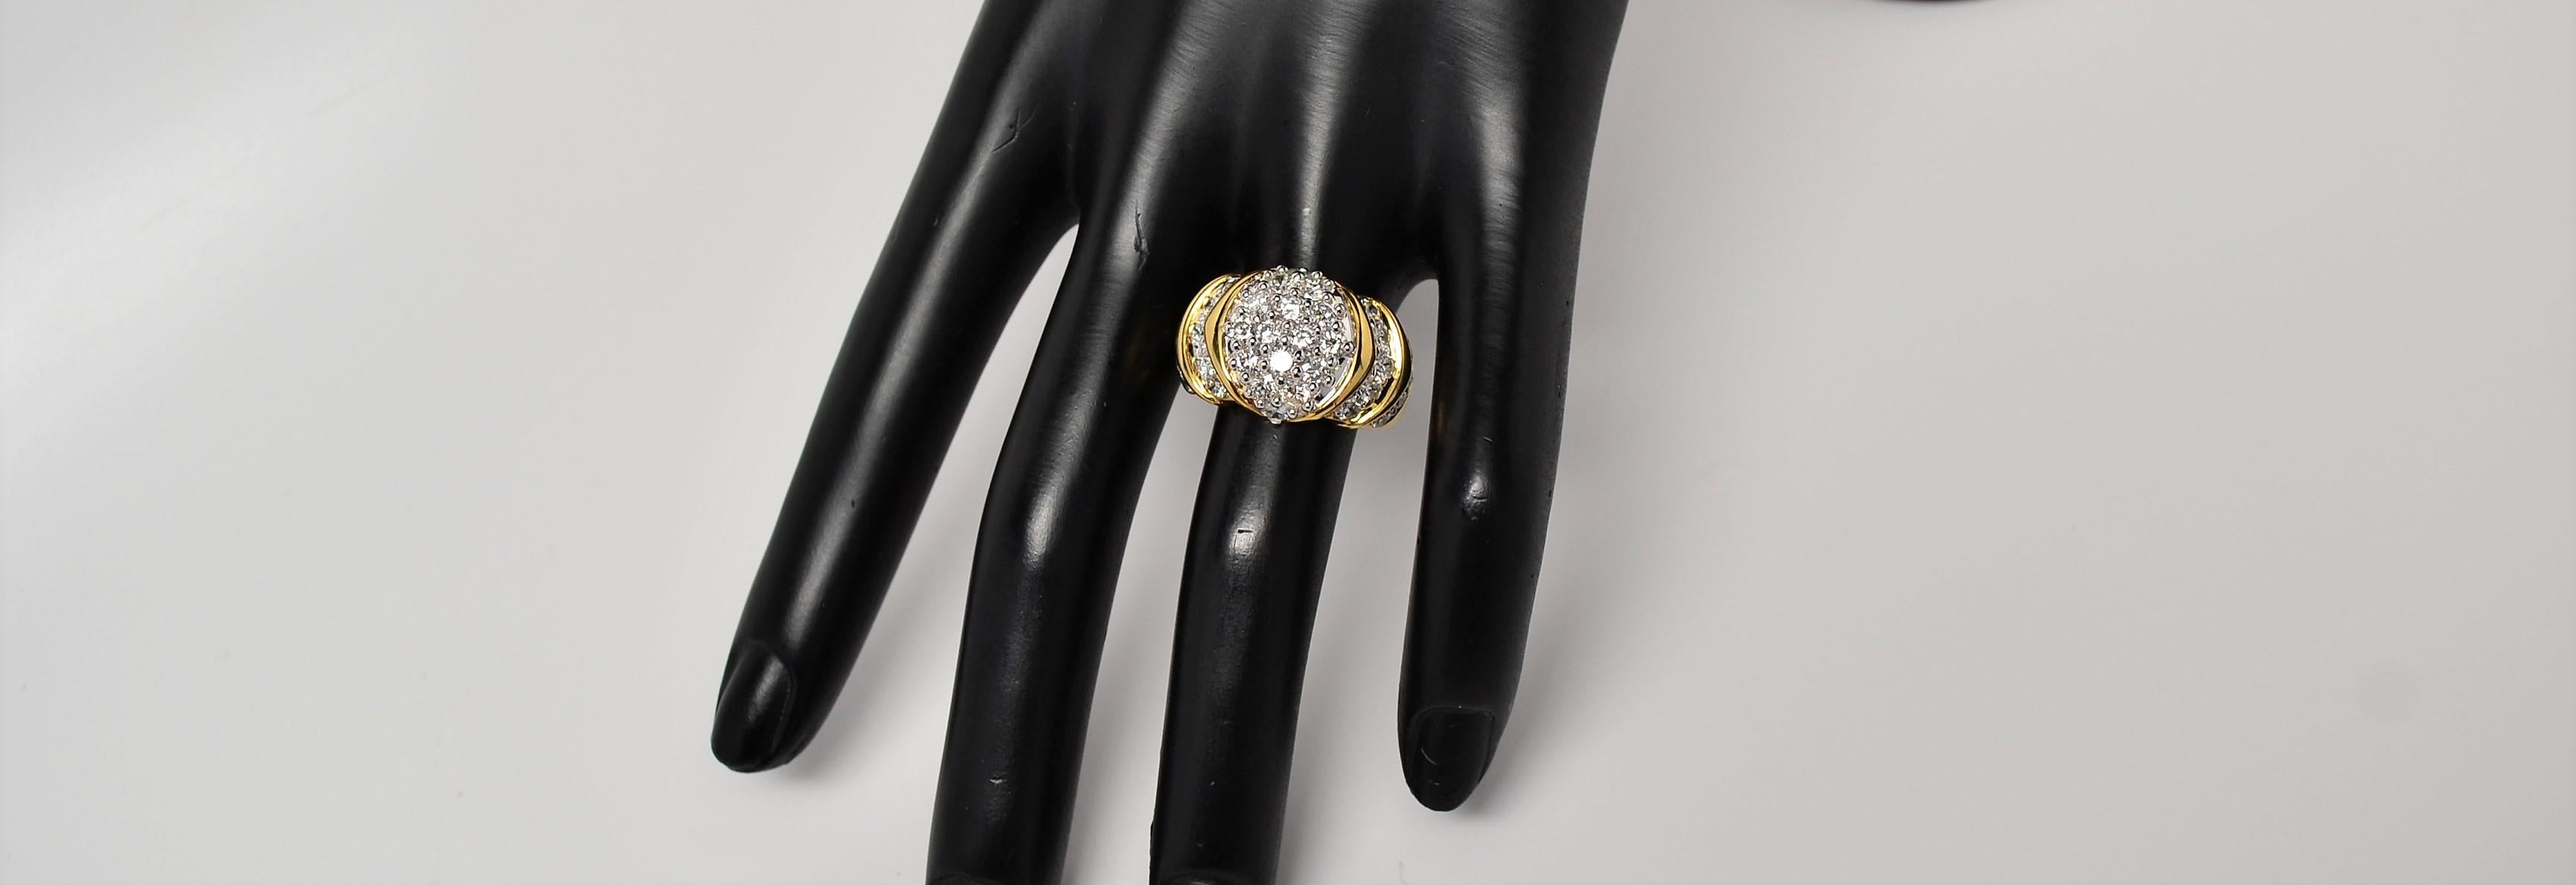 18K Two Tone Gold Ring Set with Round Brilliant Cut Diamonds, 2.89 Carats For Sale 5